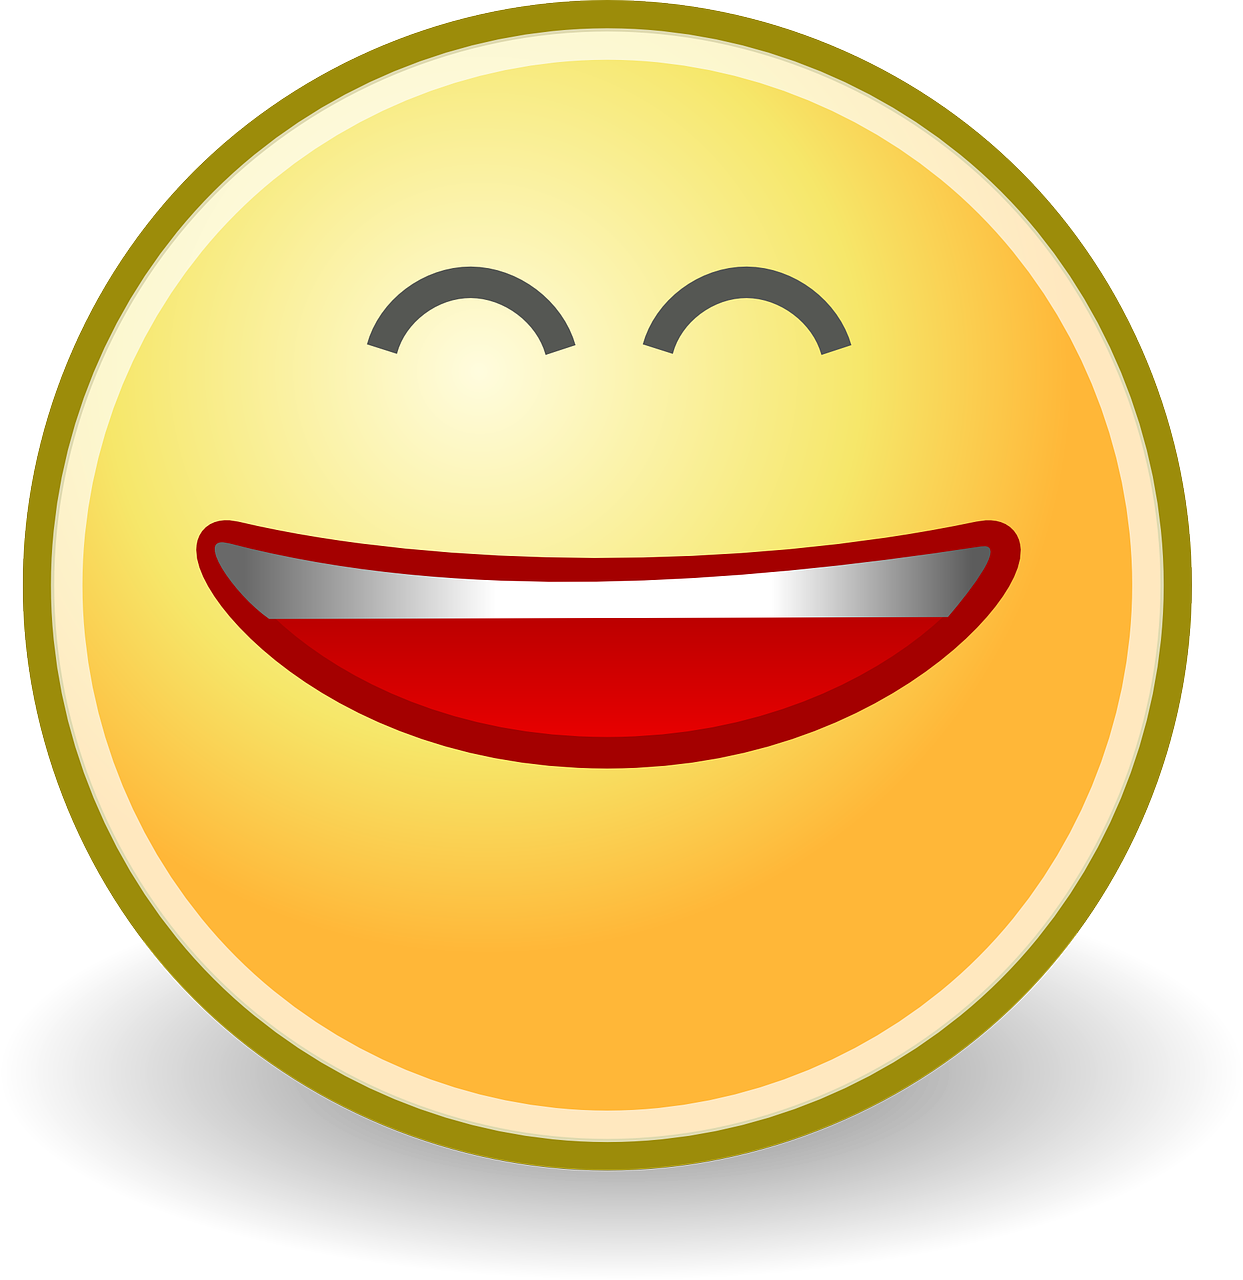 a yellow smiley face with a big smile, a picture, clip-art, !face, laughing and joking, oval shape face